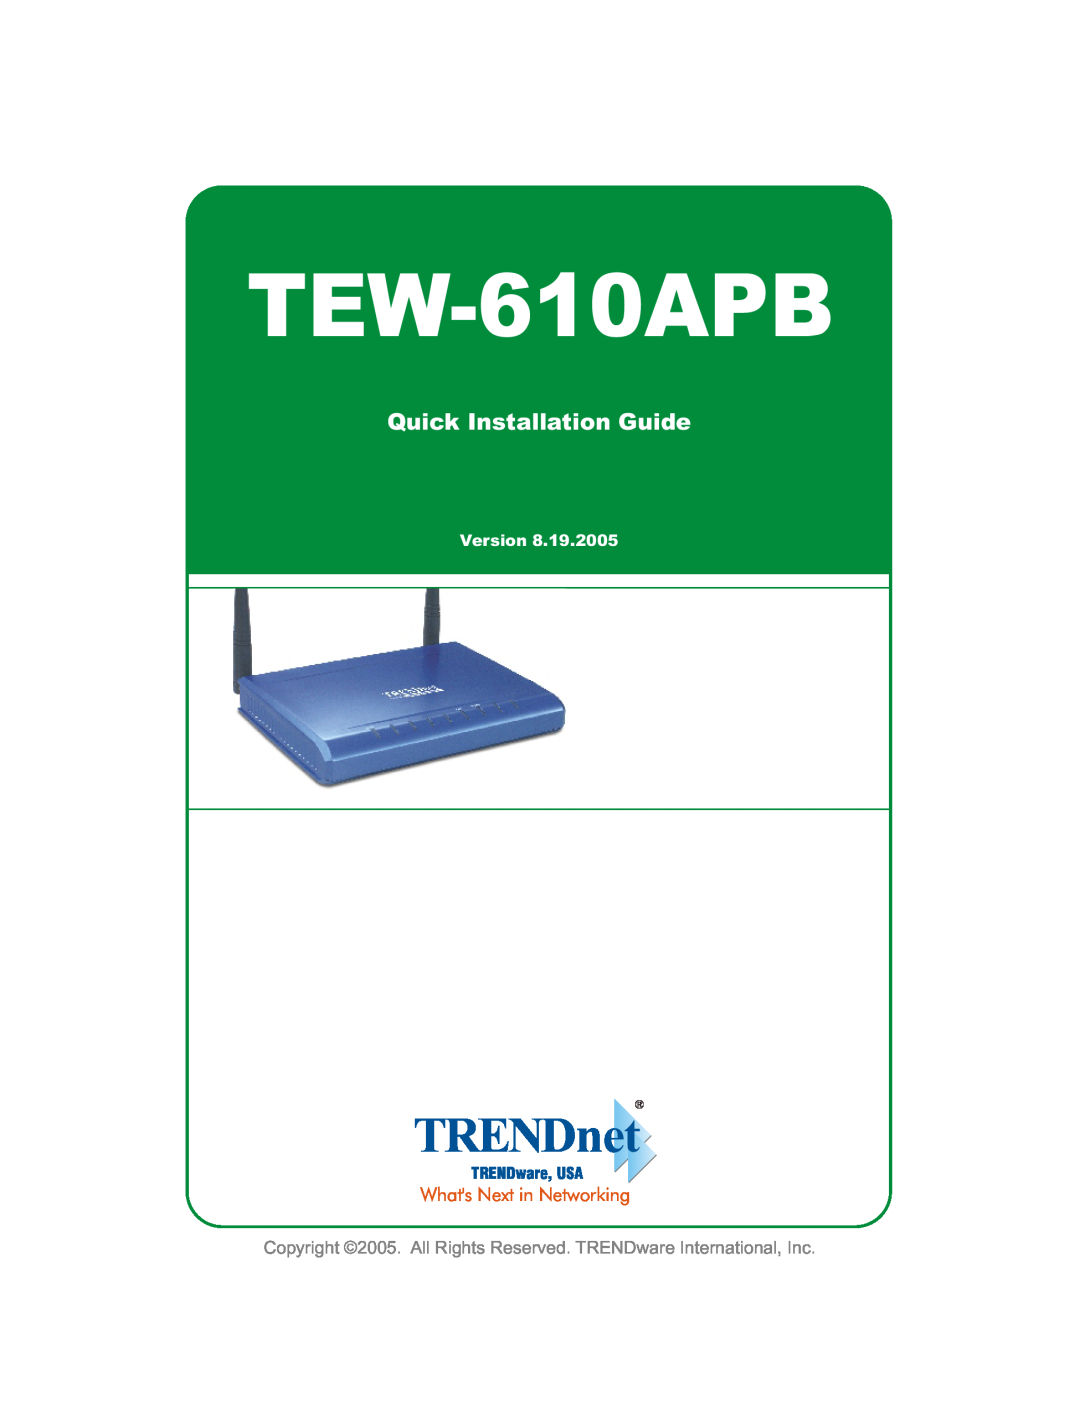 TRENDnet Wireless Access Point manual Quick Installation Guide, TEW-450APB 